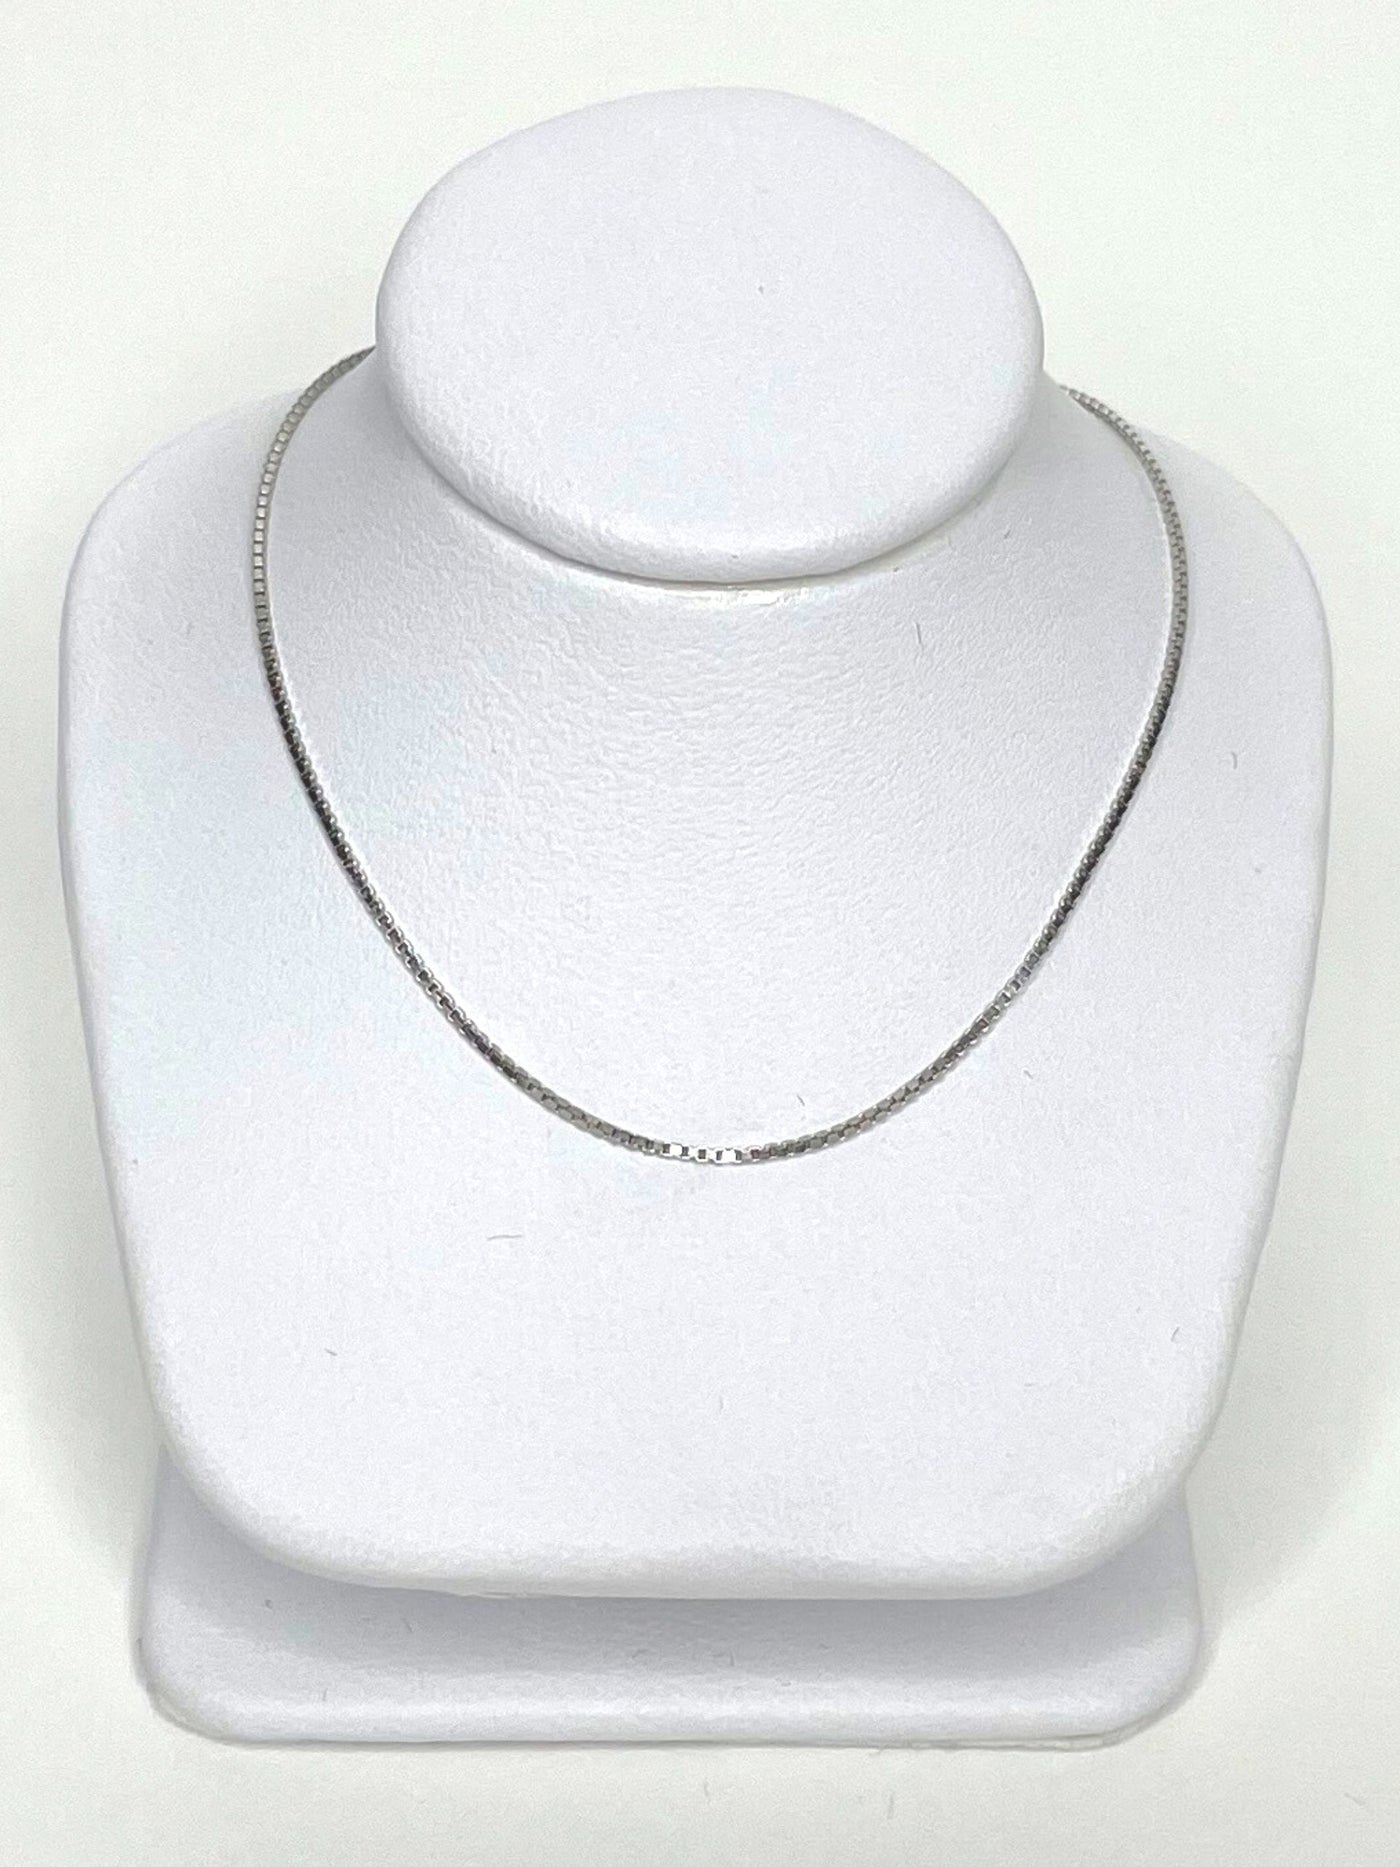 2" Sterling Silver Necklace Length Extension